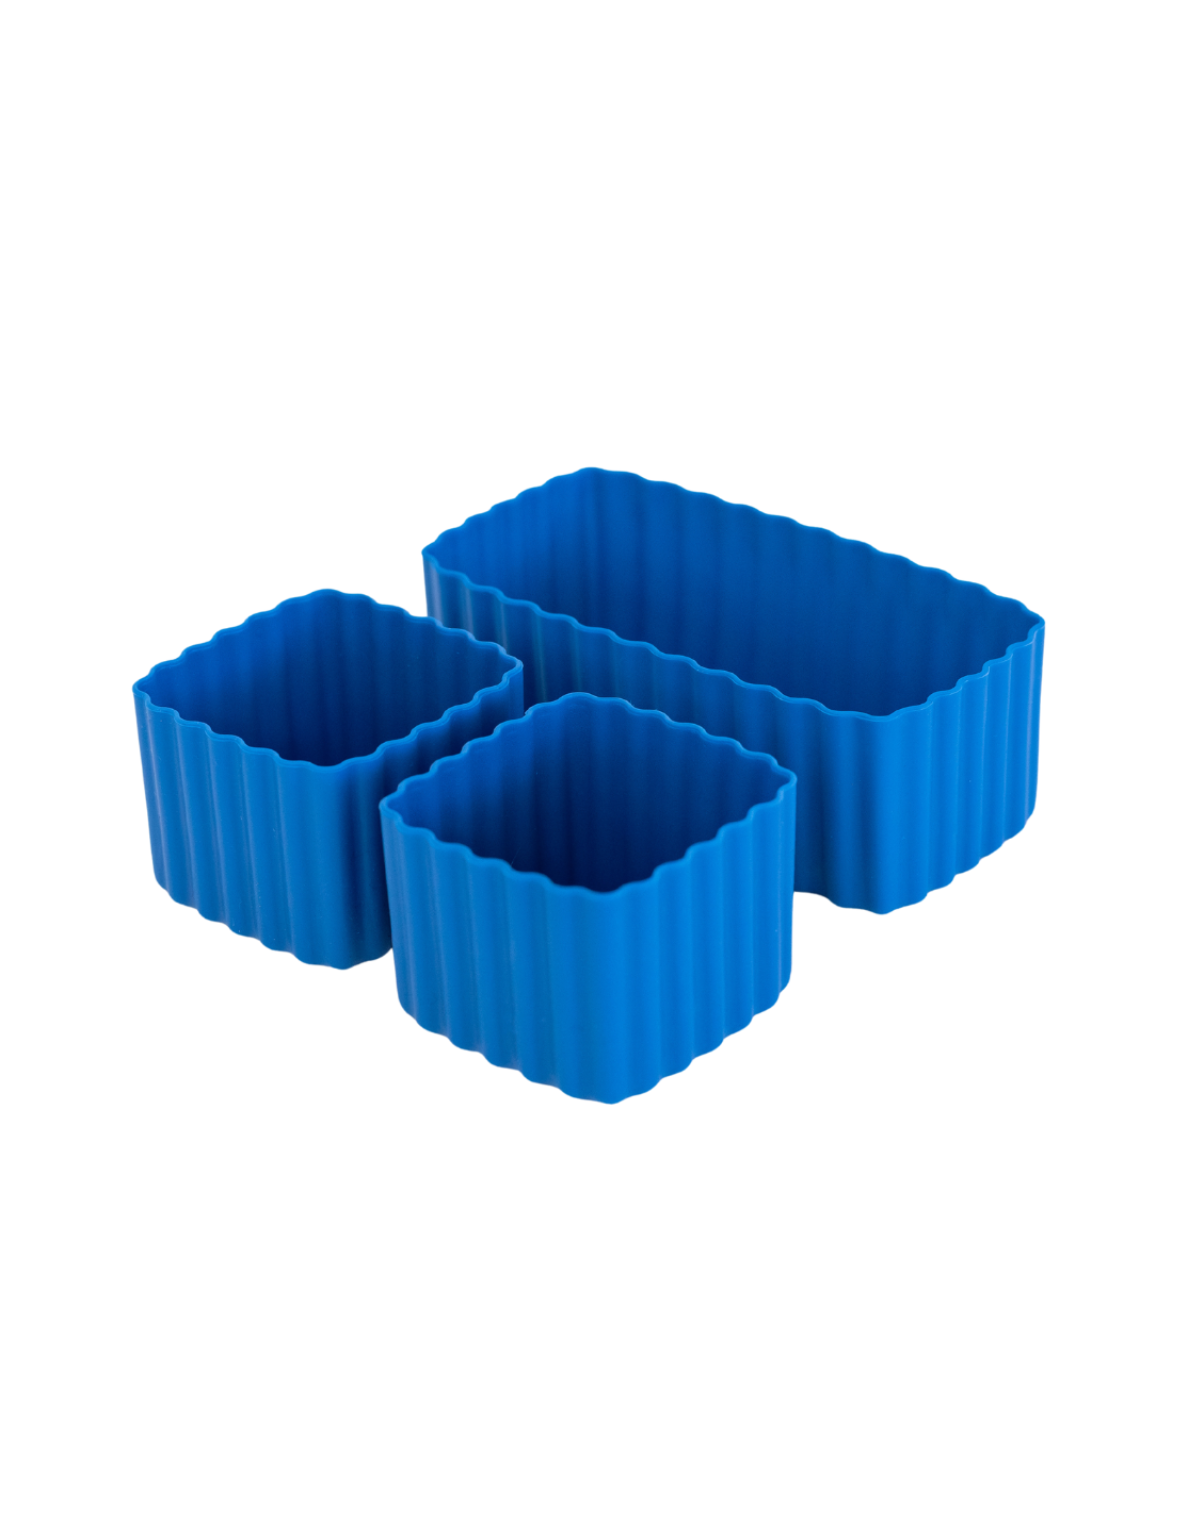 reef blue silicone bento cups for lunch box